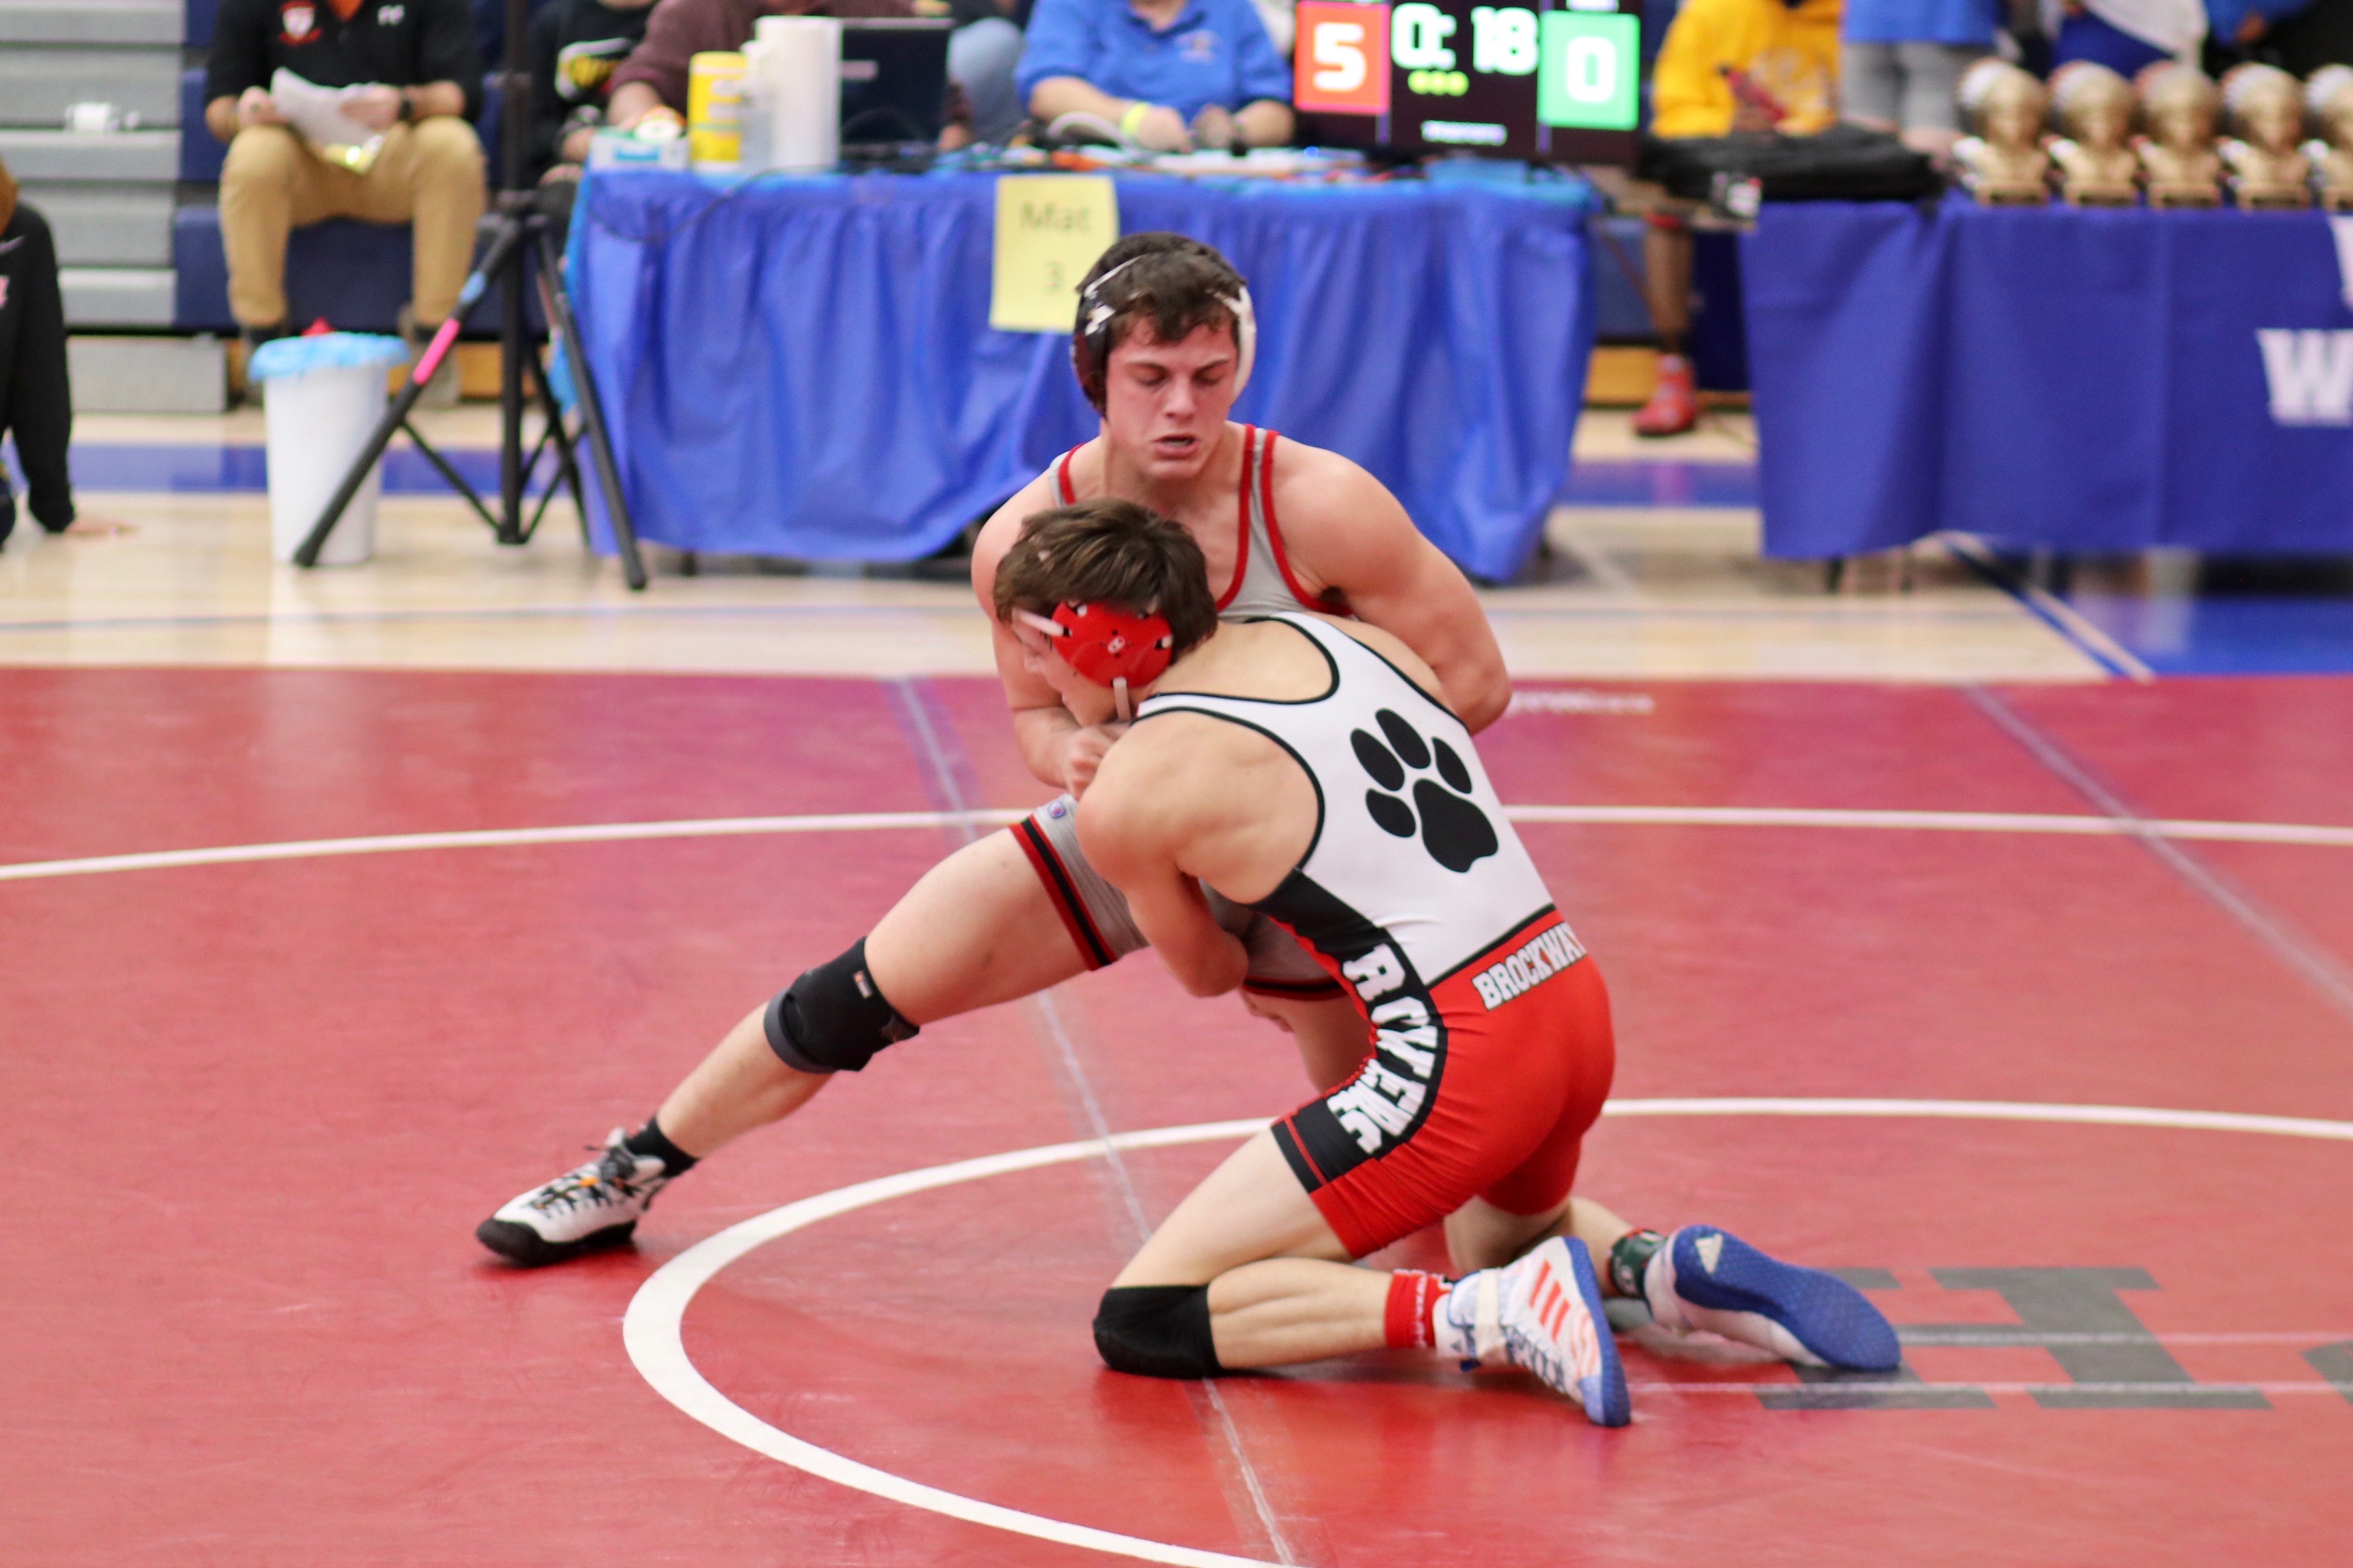 Mark McGonigal fights off a takedown in his quarterfinal bout, an eventual 5-2 win.